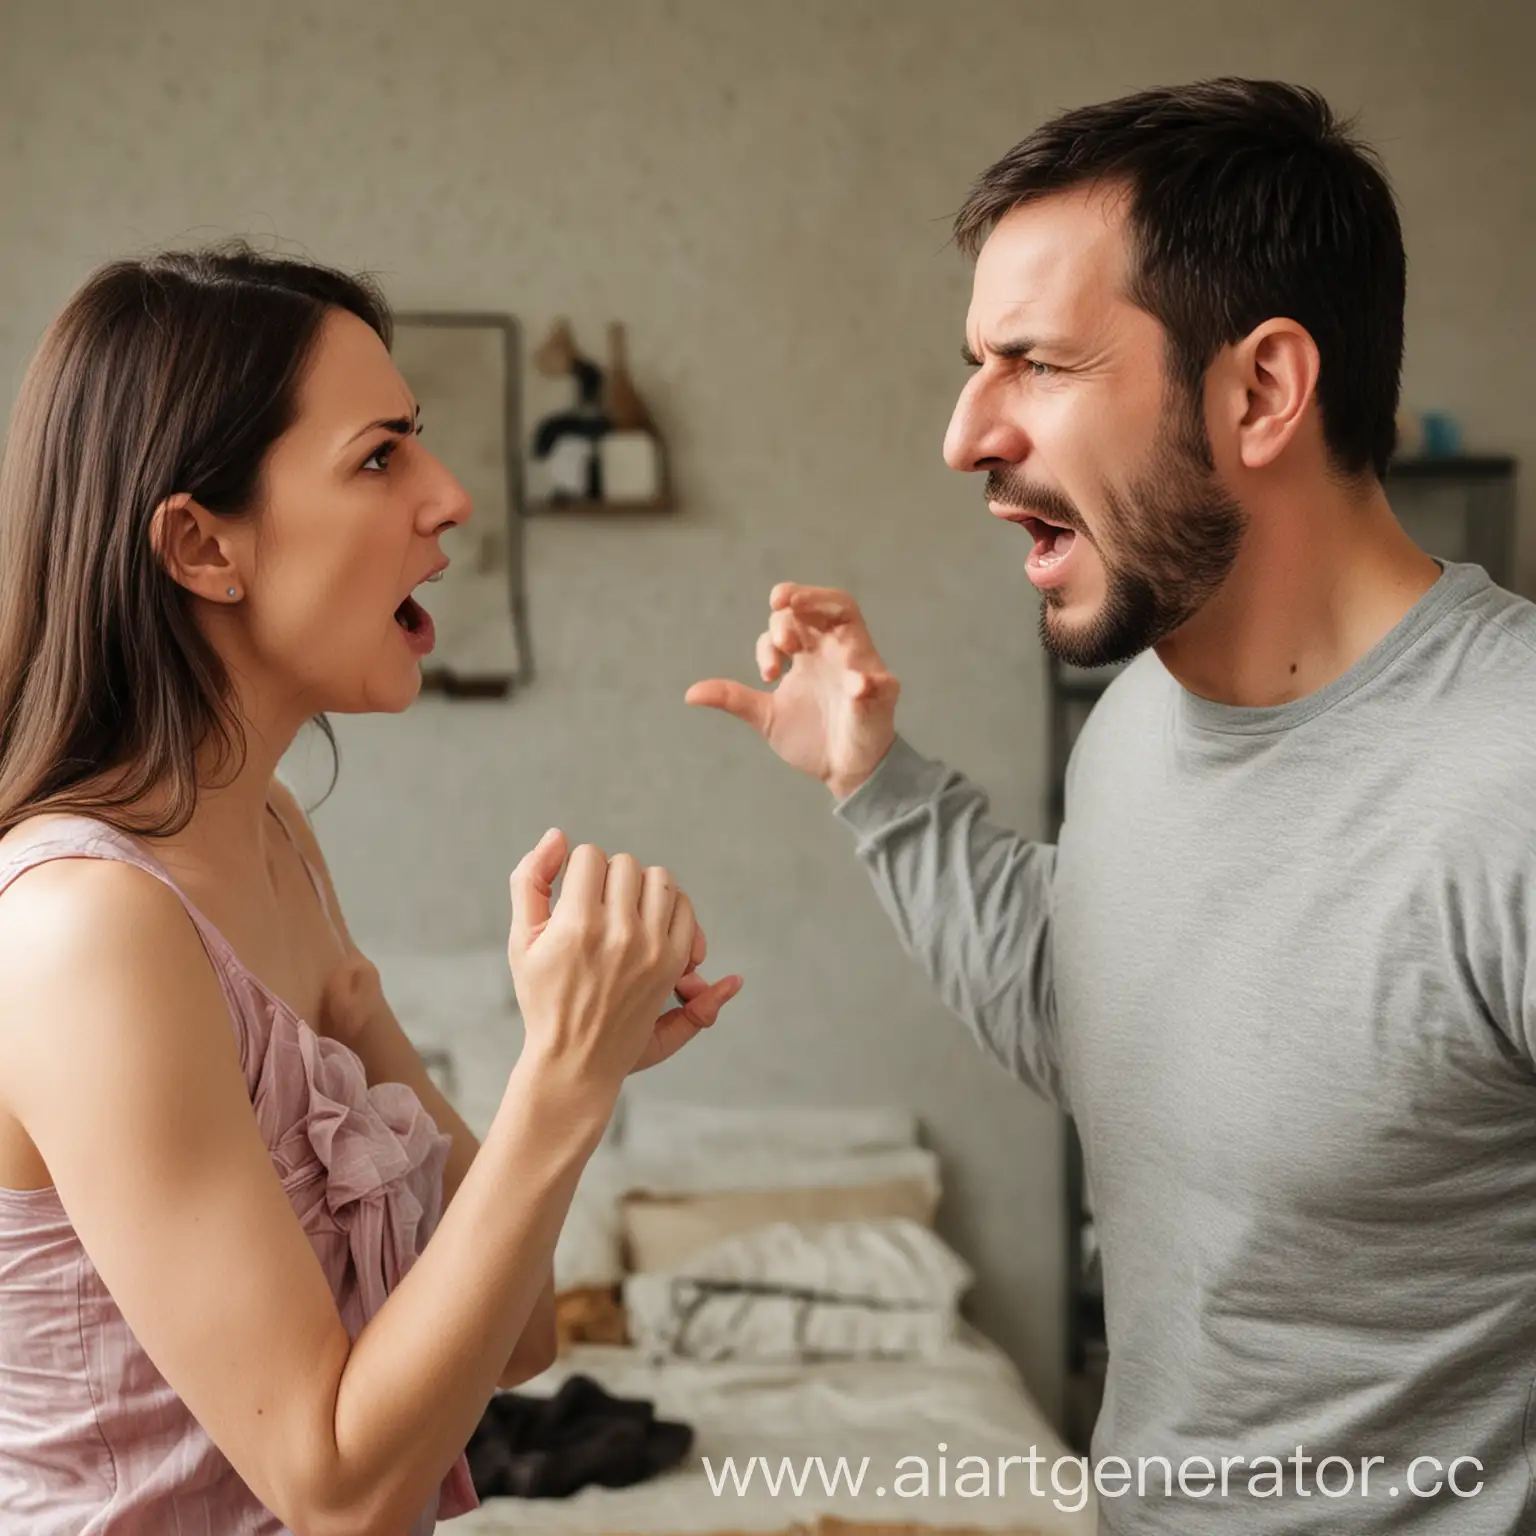 Couple-Arguing-in-Home-Setting